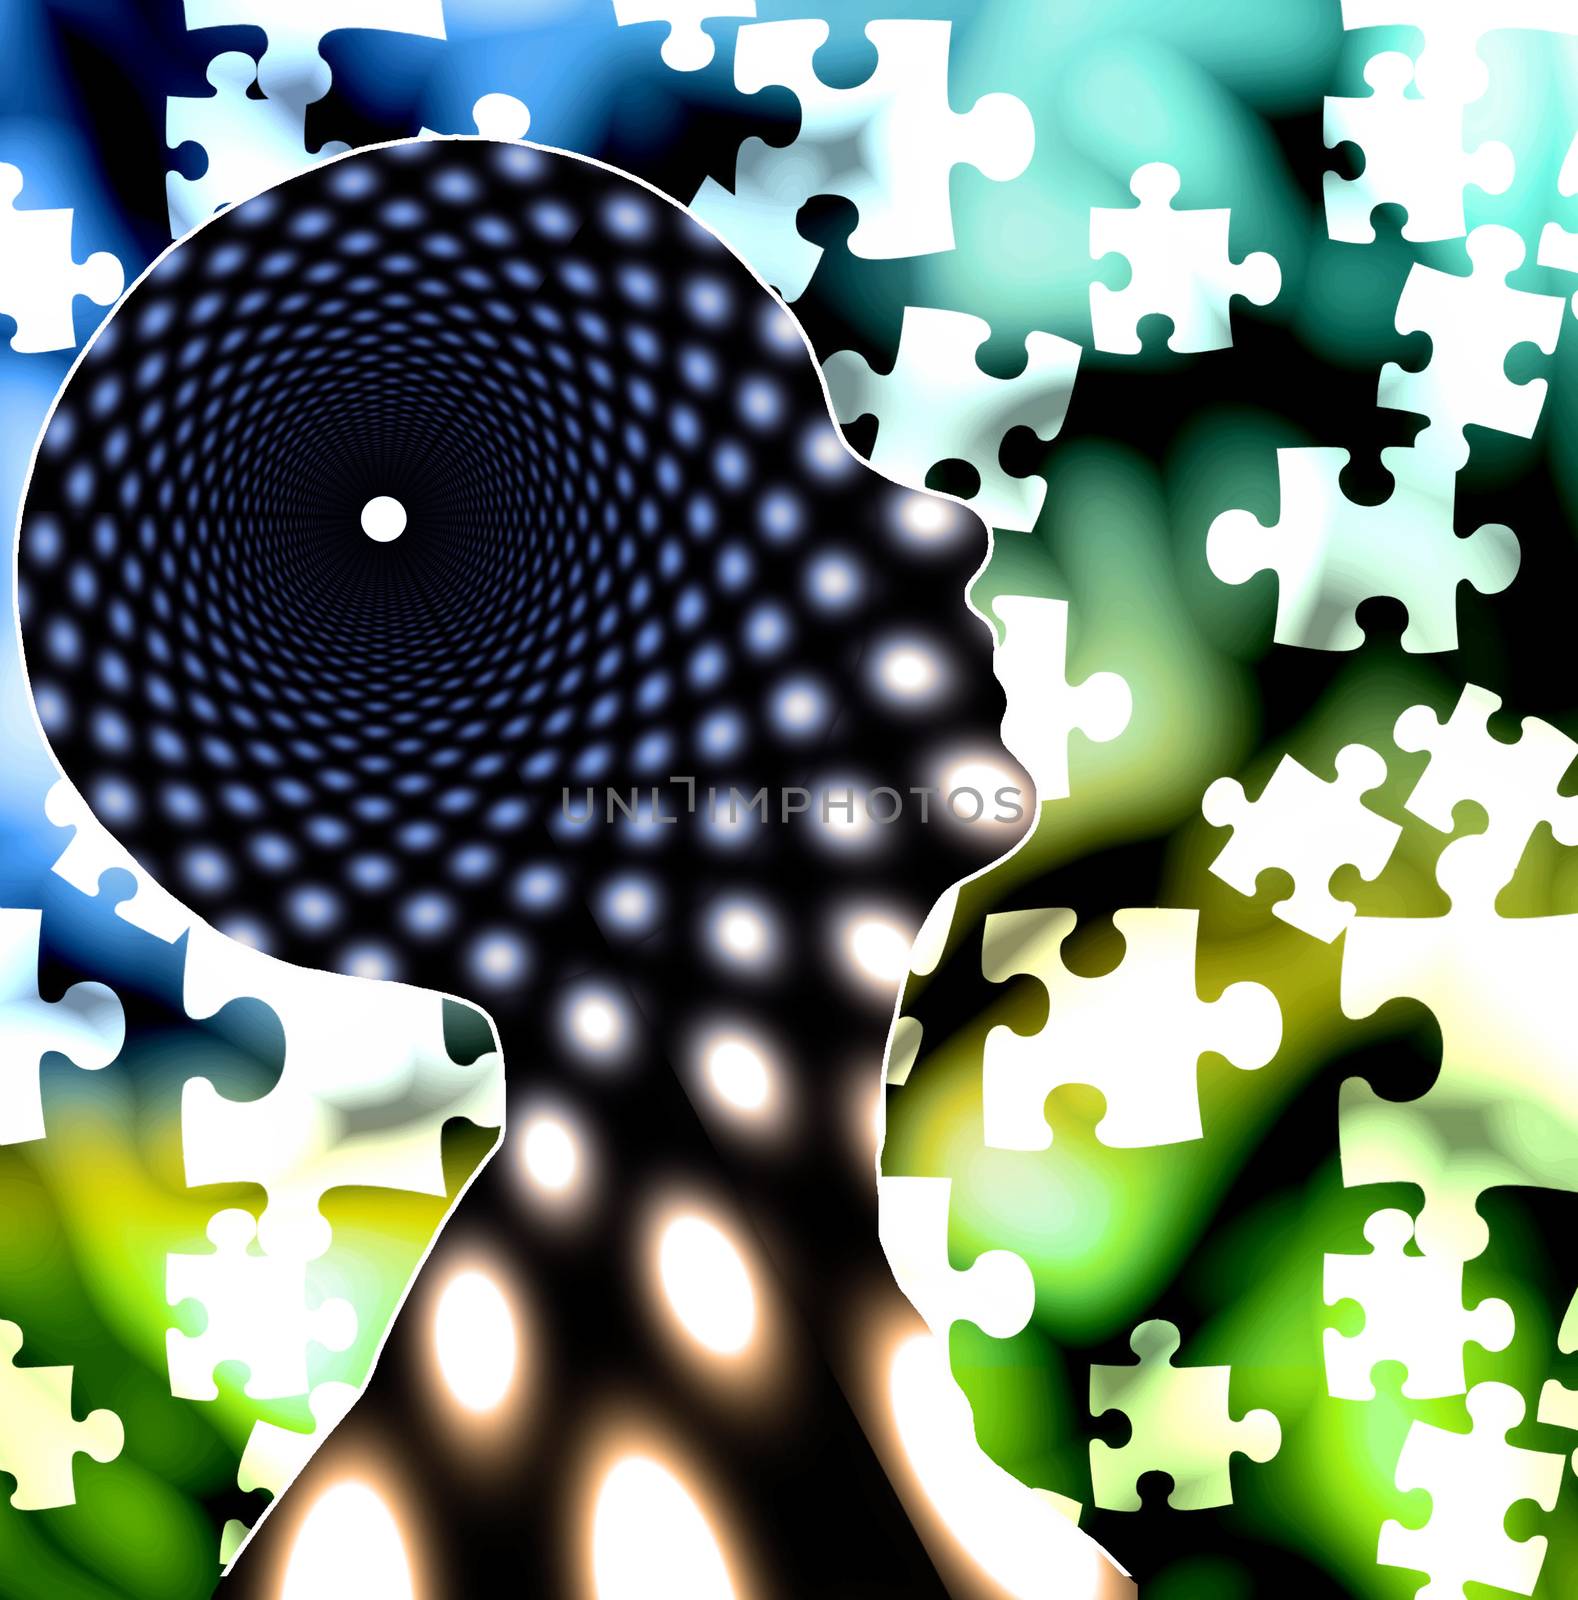 Human head silhouette with doted fractal and pieces of puzzle